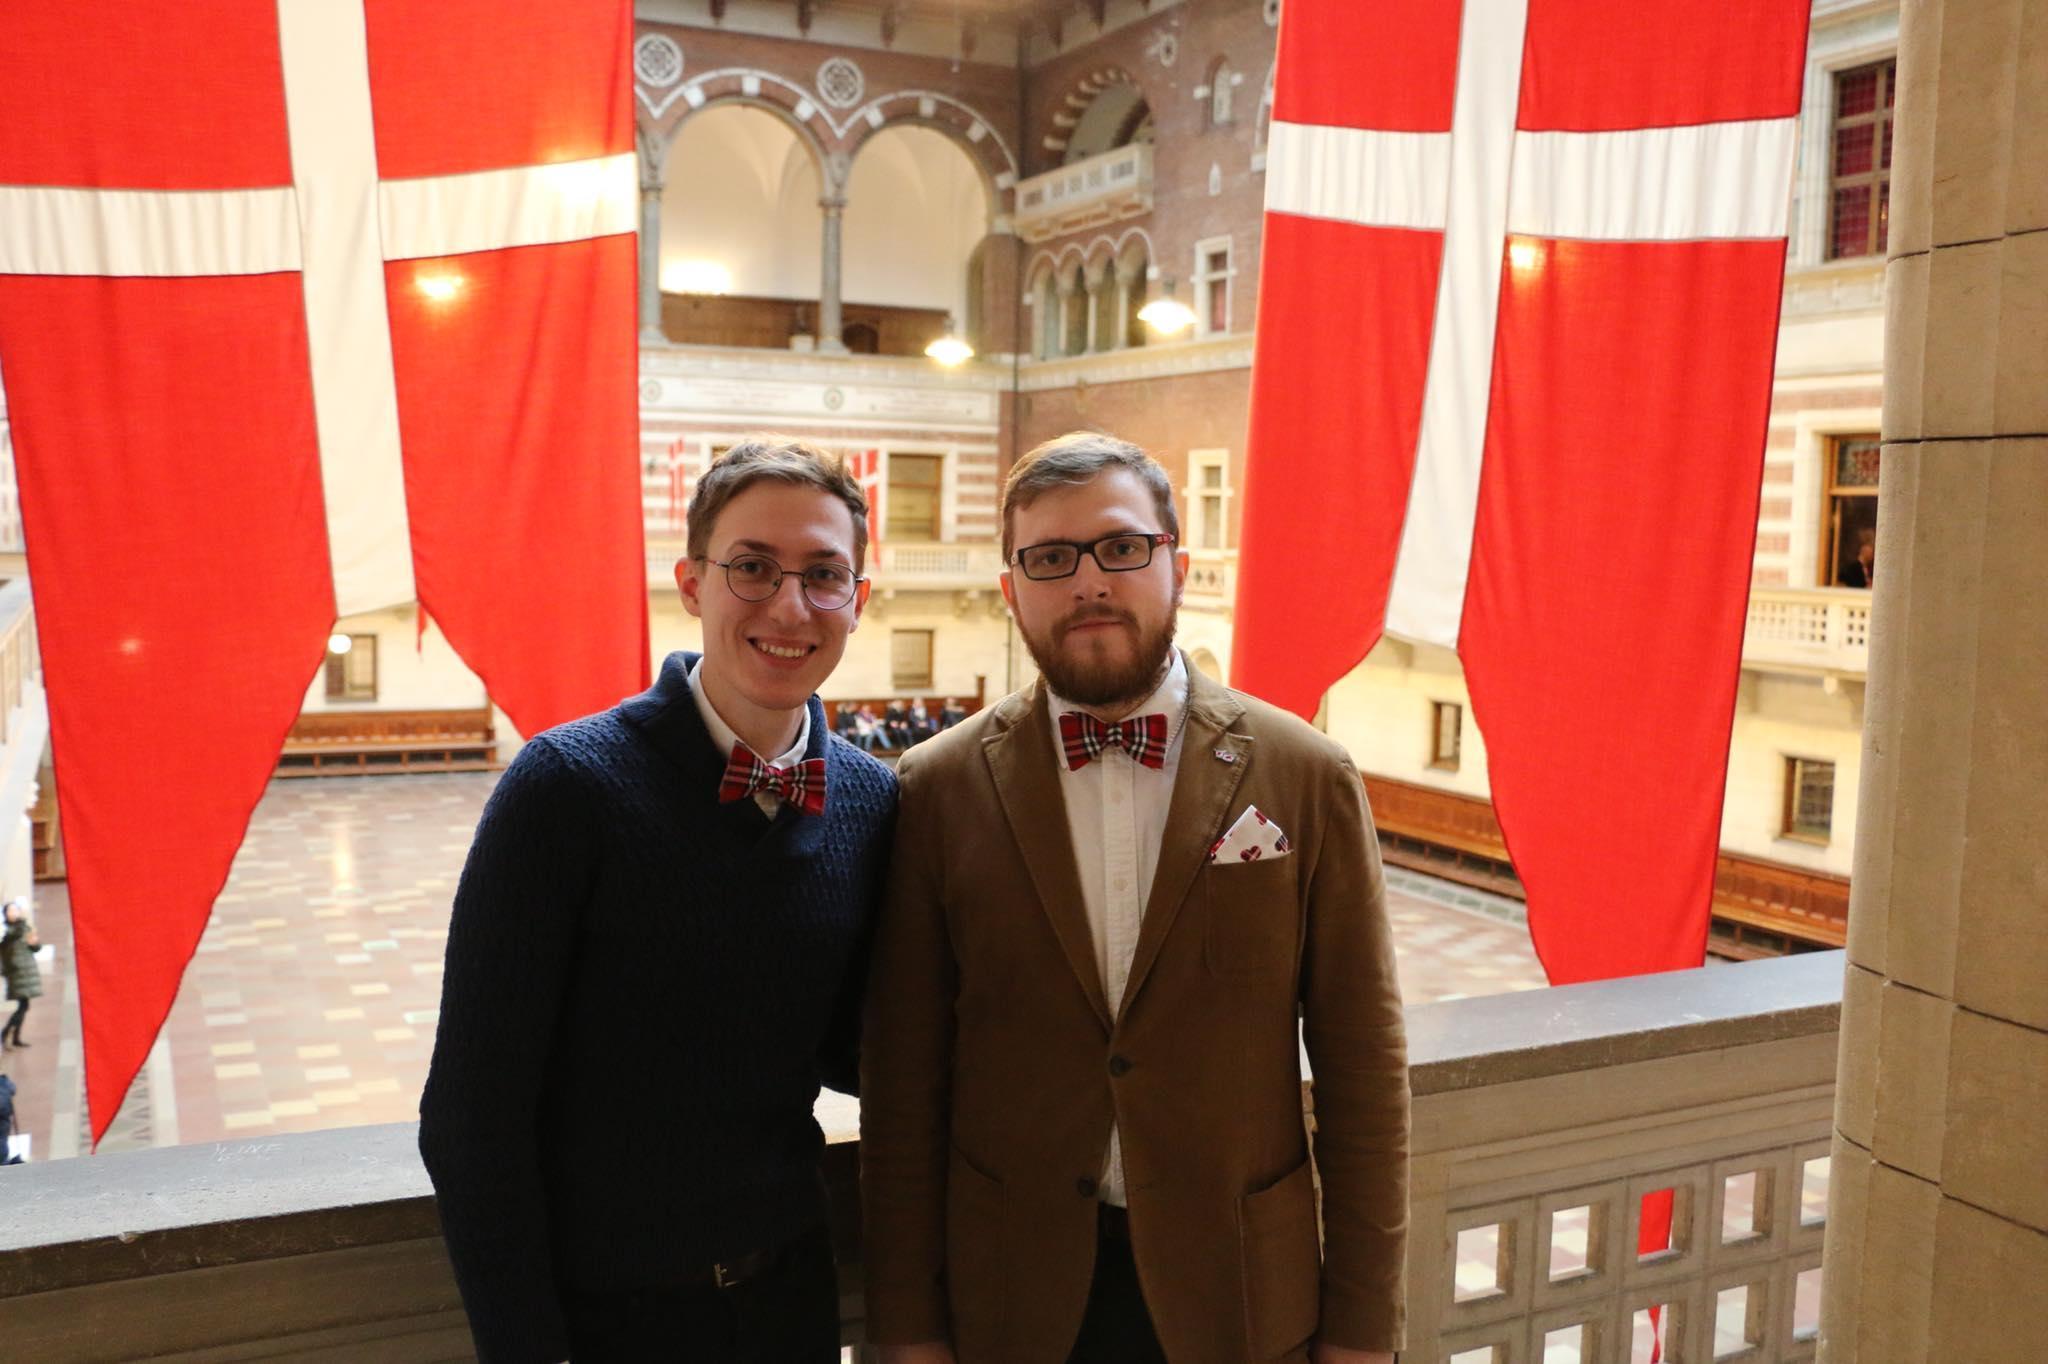 Eugene Wojciechowski (left) and Pavel Stotzko were surprised when their union was officially registered